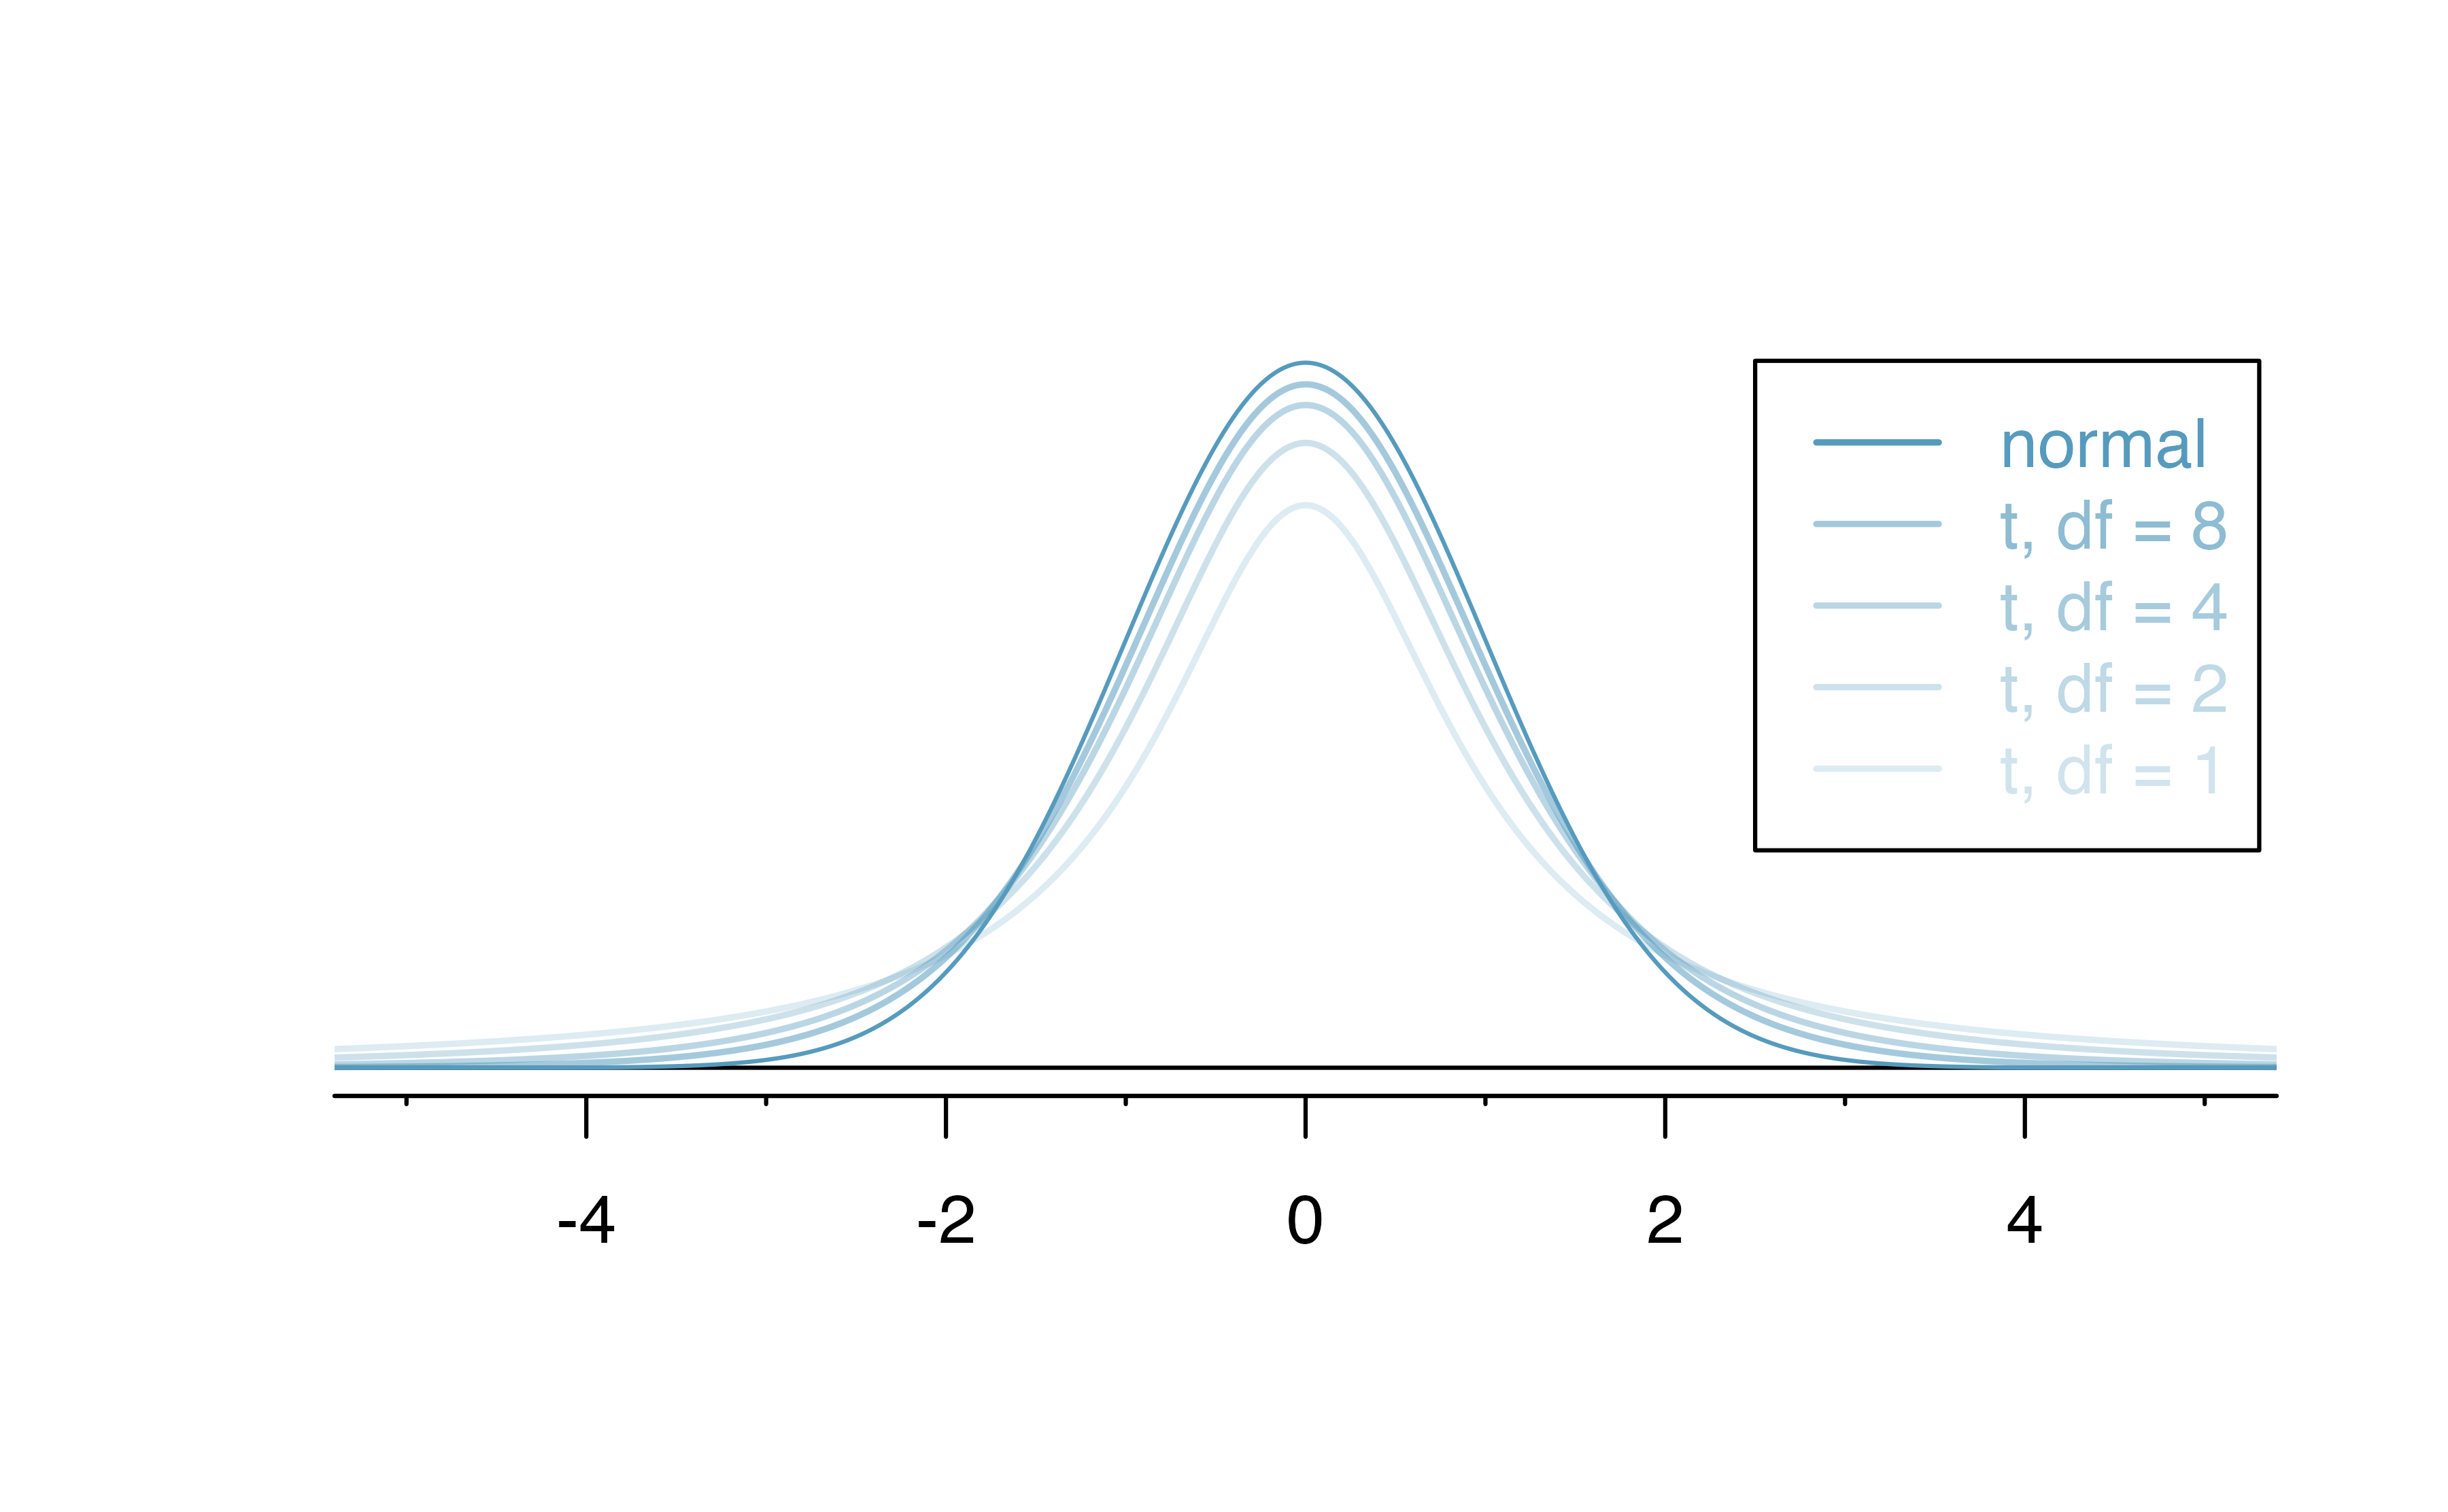 A normal distribution and four t distributions, all super imposed on top of one another.  The smaller the degrees of freedom, the wider the tails in the t distribution.